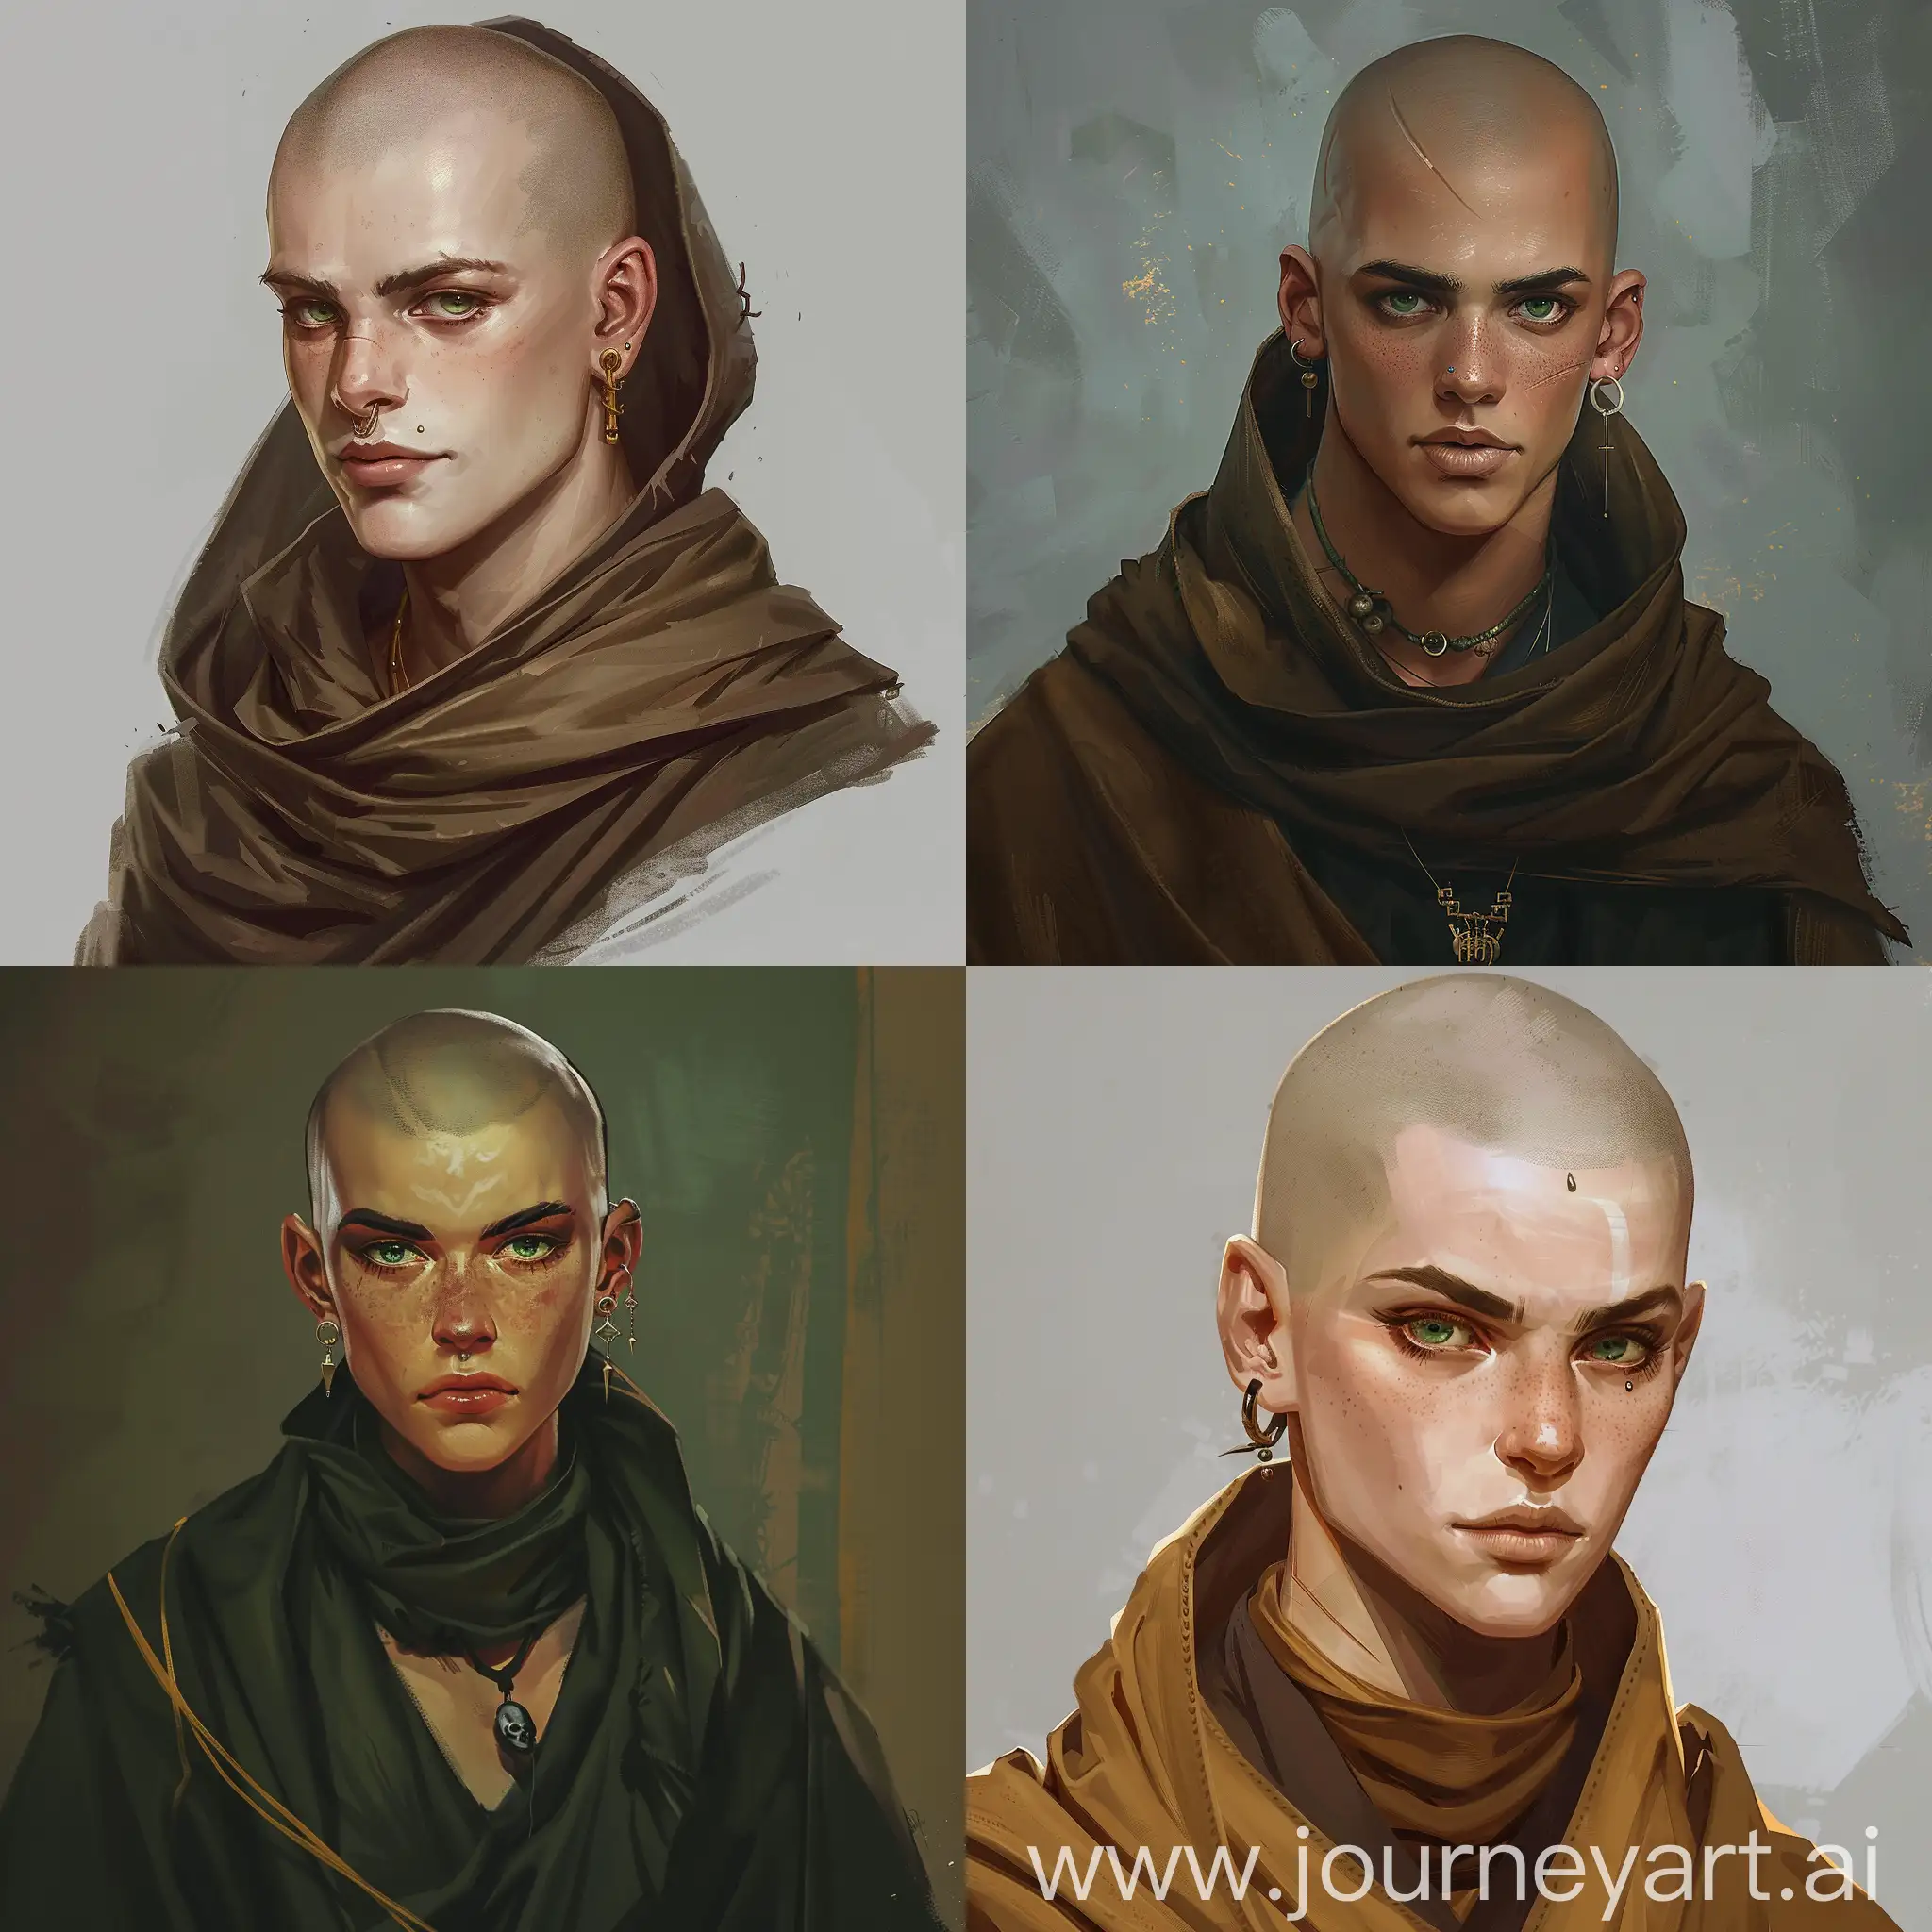 Zenful-Bald-Monk-with-Piercings-in-Traditional-Robes